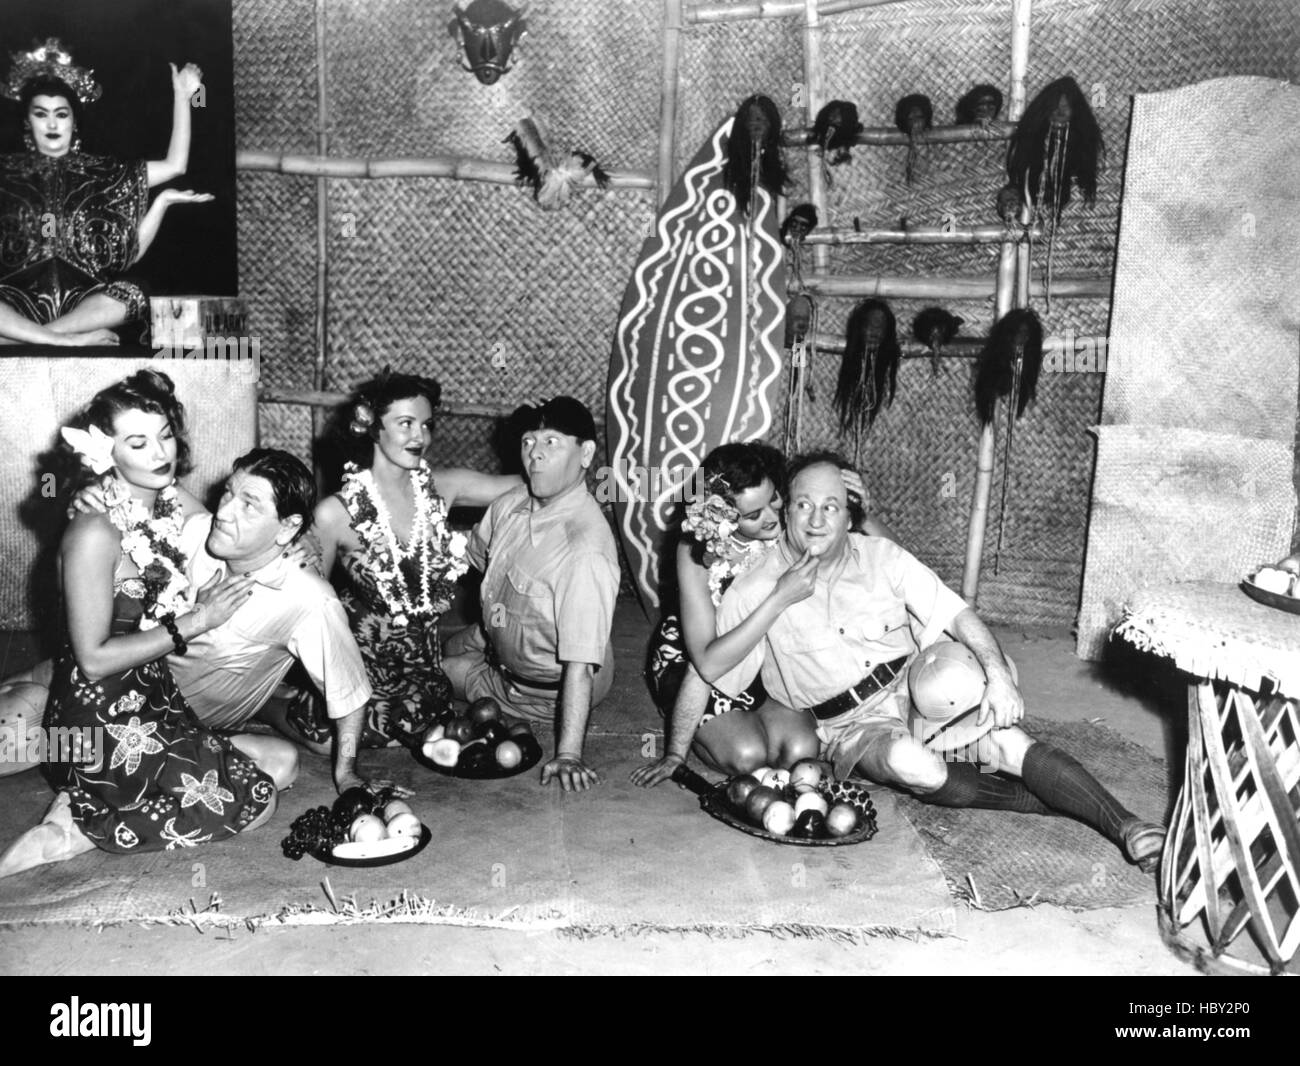 HULA-LA-LA, first, third, fifth and seventh from left: Lei Aloha, Shemp Howard, Moe Howard, Larry Fine, [The Three Stooges], Stock Photo